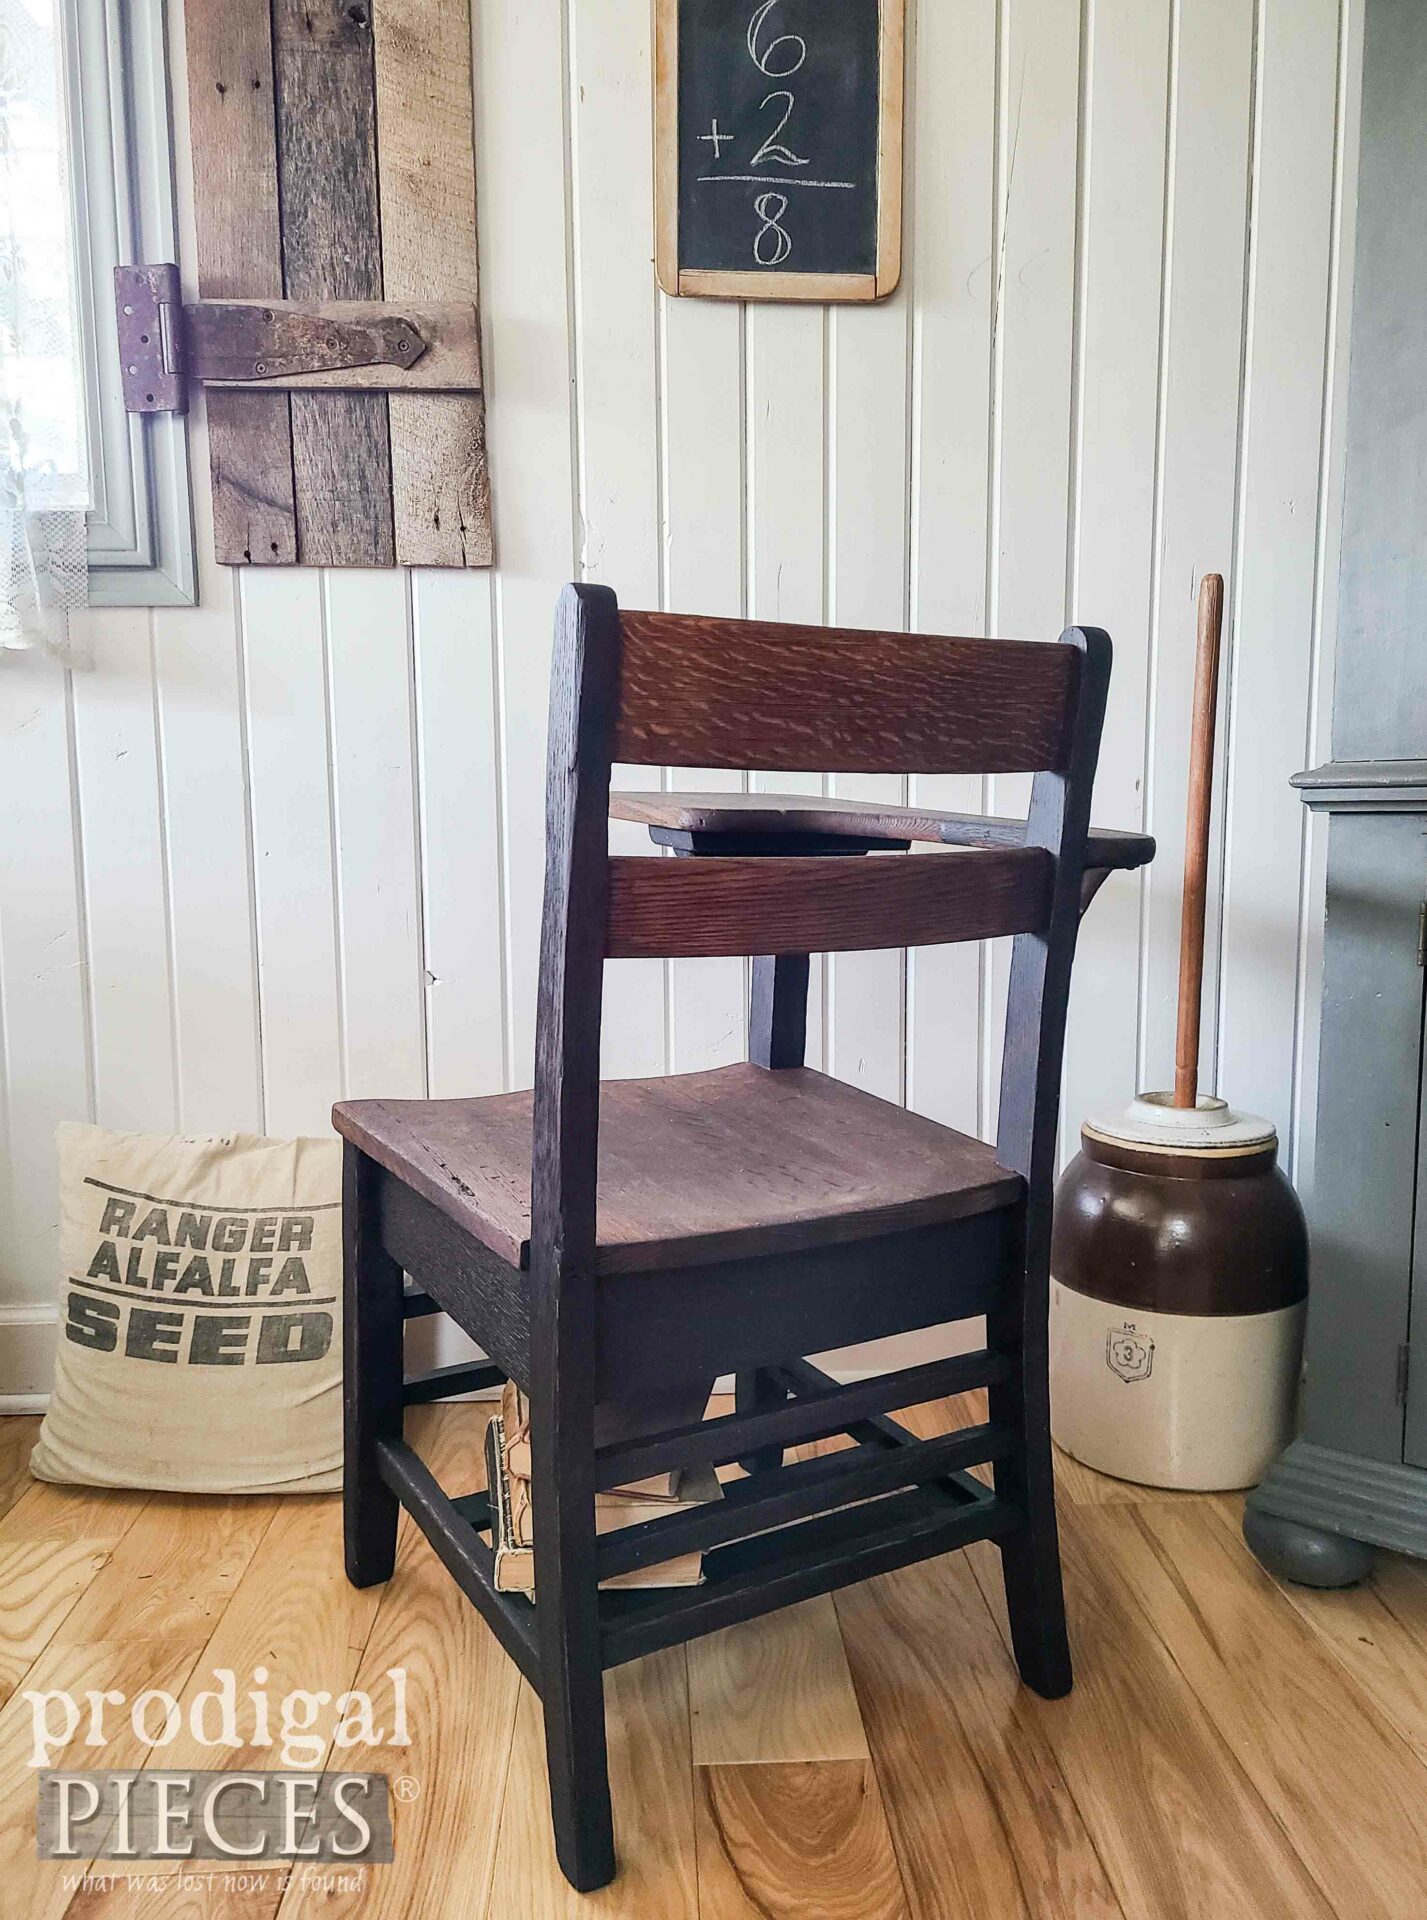 Back View of Antique School Desk by Larissa of Prodigal Pieces | prodigalpieces.com #prodigalpieces #farmhouse #makeover